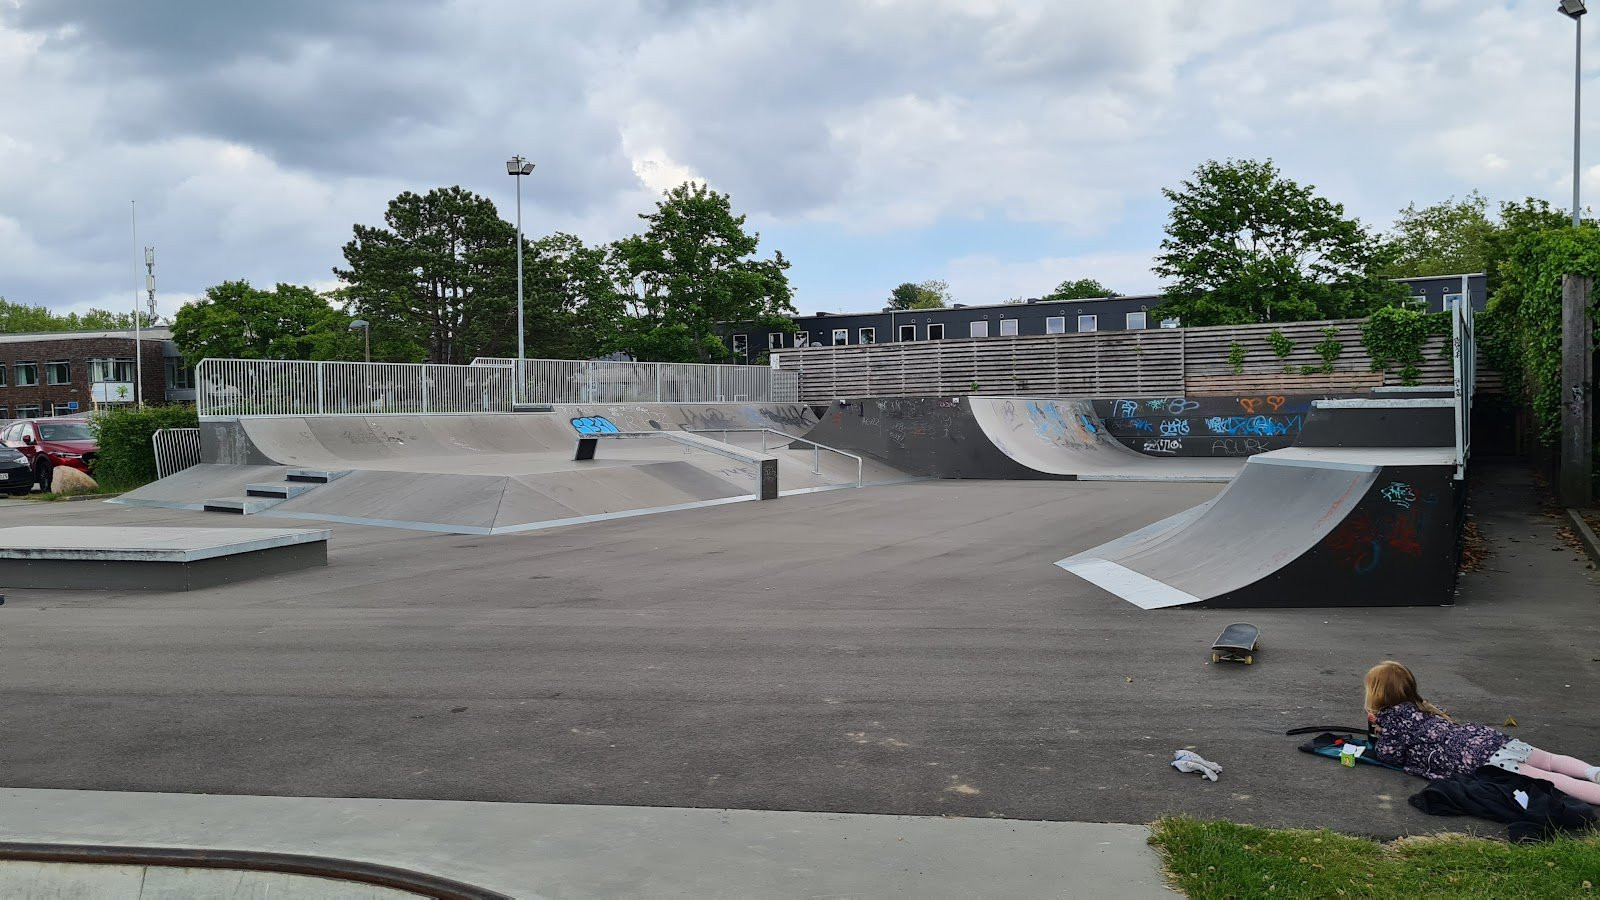 Hørsholm skatepark is a newly built made of black wood and steel on a concrete foundation. The park’s quarter pipes and banks are placed at the edge of the park so that skaters can maintain speed and flow throughout the park. In addition, the obstacles of the park are made of wood so that it is possible to move them around if needed. There is also a large manual pad course with more quarters and grind boxes.The park is definitely worth a visit as the quality of the park and its design is very professional. The transfer course is probably the most unique element of the park. Here, there are both quarter pipes, banks, spines and ledges. This course is perfect for doing airs, transfers and grinds. The park’s mini vert is on the other side. Here, there are great opportunities for you to practise your tricks and the mini vert appeals to all skaters regardless of their level as it is 1,5 metres high.Hørsholm Skatepark has been expanded with a bowl. You can see the bowl in some of our pictures. The bowl is located at Stadionallé 7. The bowl is designed by FRS Beton together with Beaver Concrete. Wonder Concrete and Enr have established the low part of it as well as the mini ramp.Pivotech enriched us with a lot of skateparks: Kolding Skatepark, Feldballe Skatepark and MPH to mention some of them.You can follow Pivotech and their projects on facebook.This expansion was described in August, 2014.